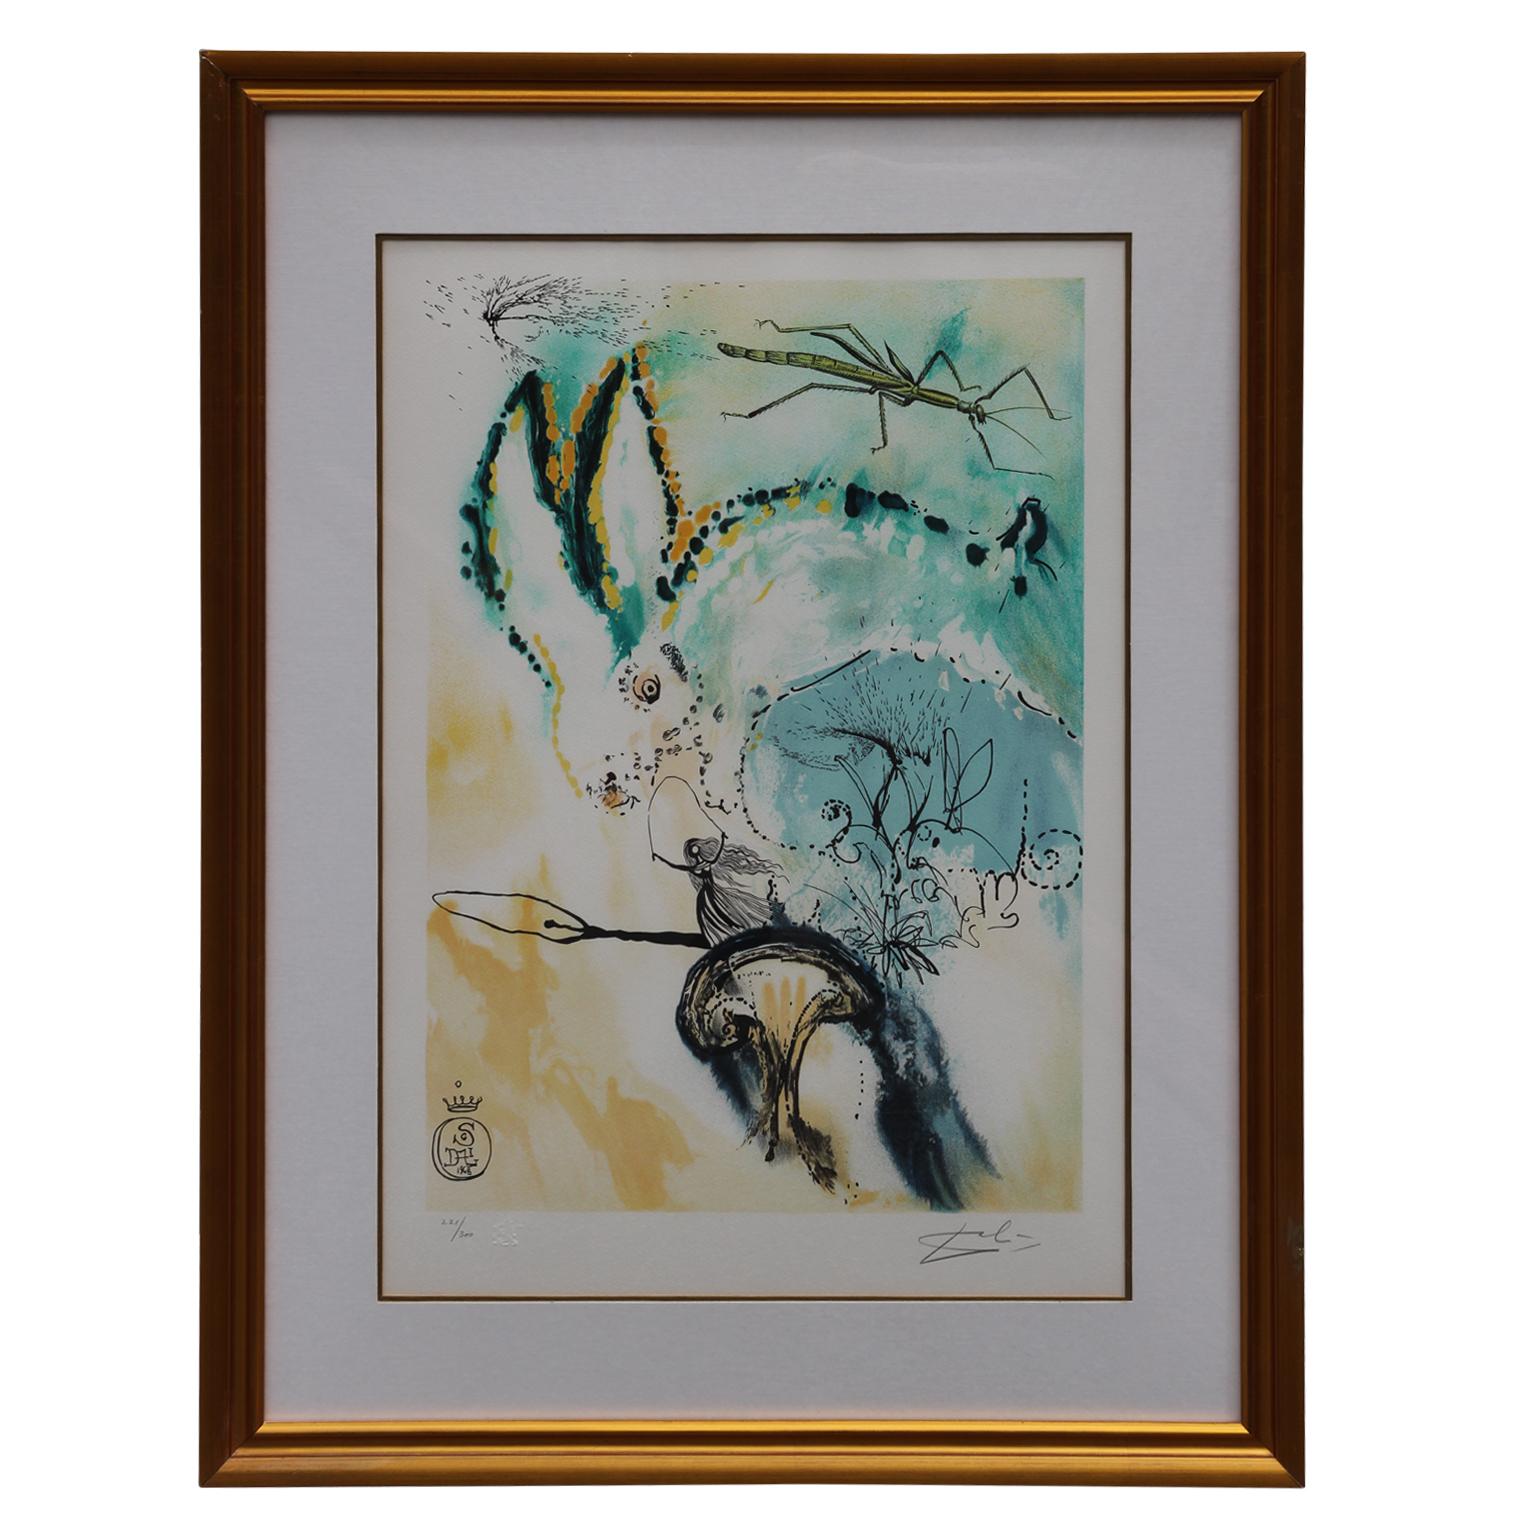 Salvador Dalí Abstract Print - "Alice in Wonderland Down the Rabbit Hole" Surrealist Lithograph 221 of 300 